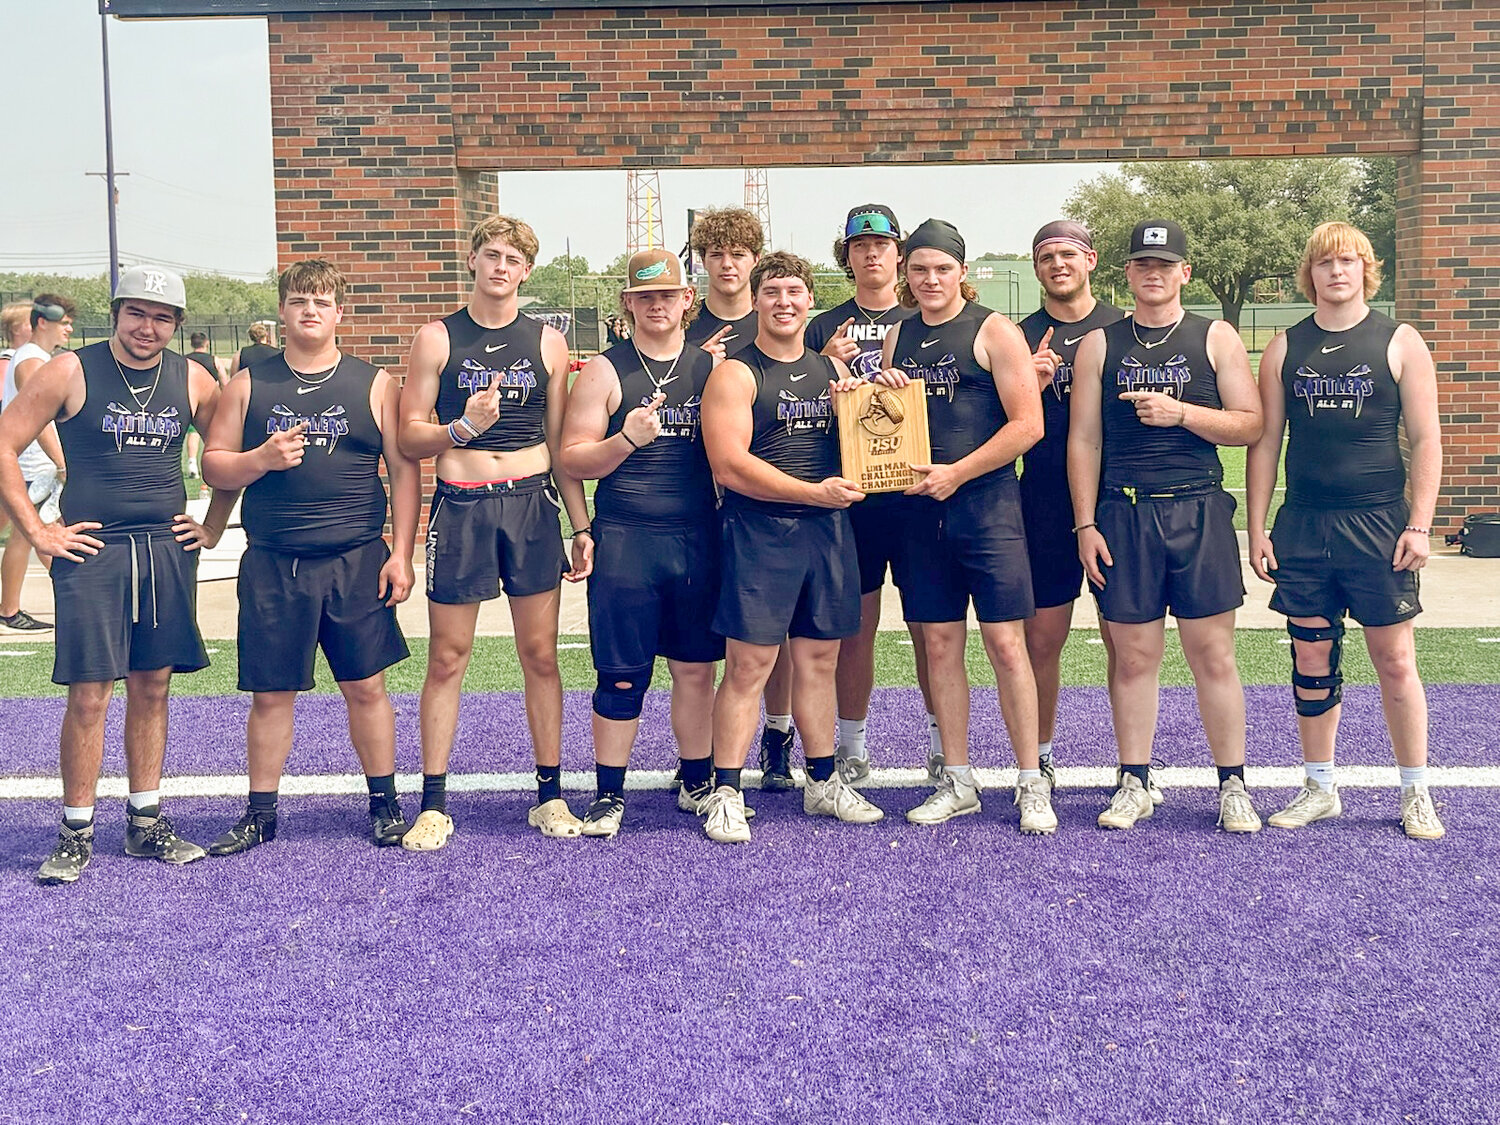 Tolar athletes participating in the State Lineman Challenge Saturday, June 22 at Hardin-Simmons University in Abilene are (from left) Bryce Towns, J.W. Rickabaugh, Hunter Michels, Lane Kutej, Cayden Abrego, Sam Stewart, Drew Cooper, Zane Graham, Peyton Brown, Toby Combs and Cash Clark.